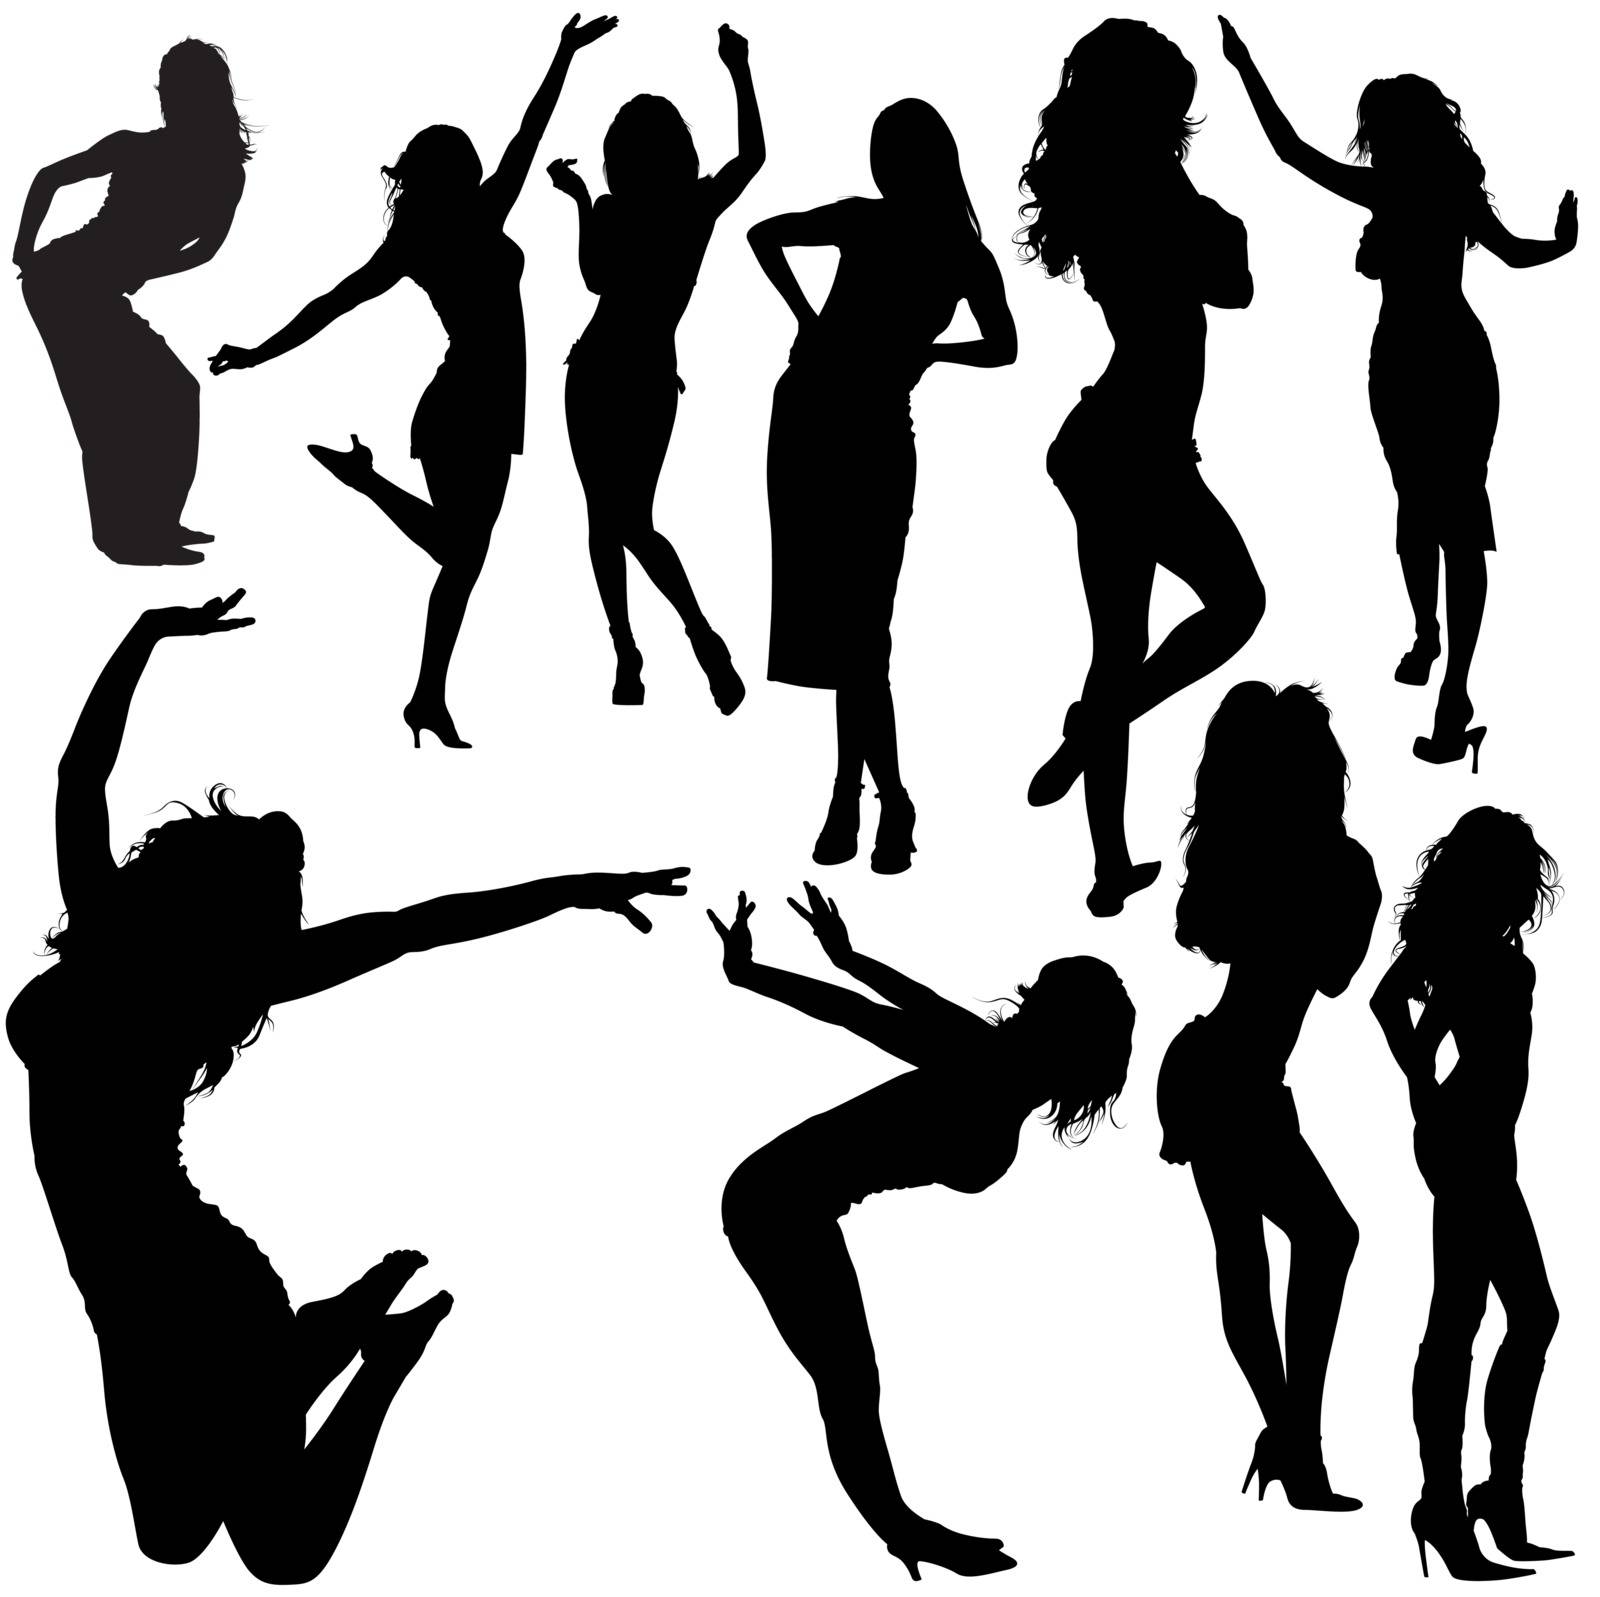 Dancing Girls - Black Silhouettes And Dance Poses, Vector